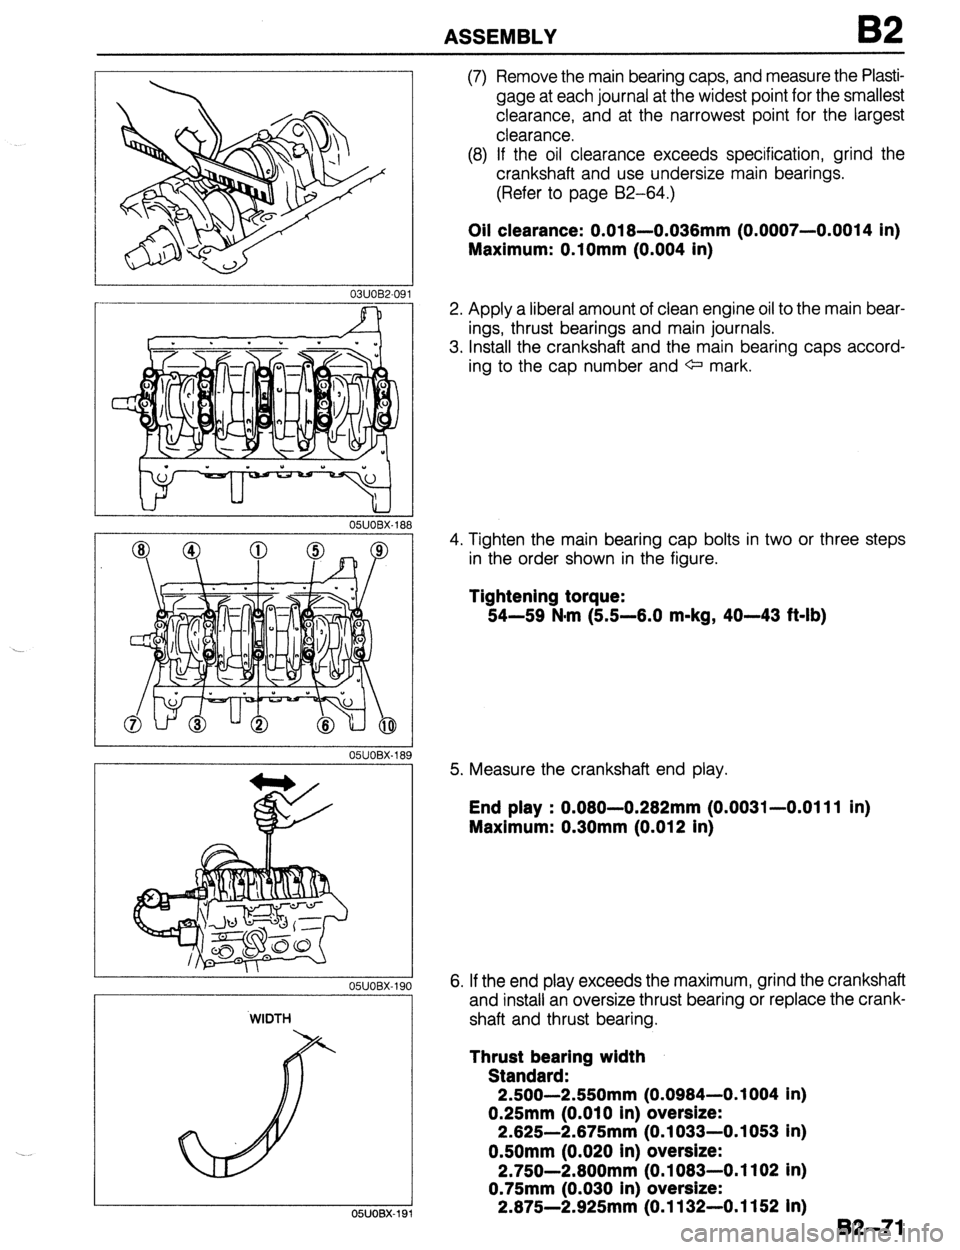 MAZDA PROTEGE 1992  Workshop Manual ASSEMBLY B2 
r 
03UOB2-09 
__~~ 
05UOBX-188 
. 
OWOBX-19( 
WIDTH 
I 
05UOBX-19 
(7) Remove the main bearing caps, and measure the Plasti- 
gage at each journal at the widest point for the smallest 
cl